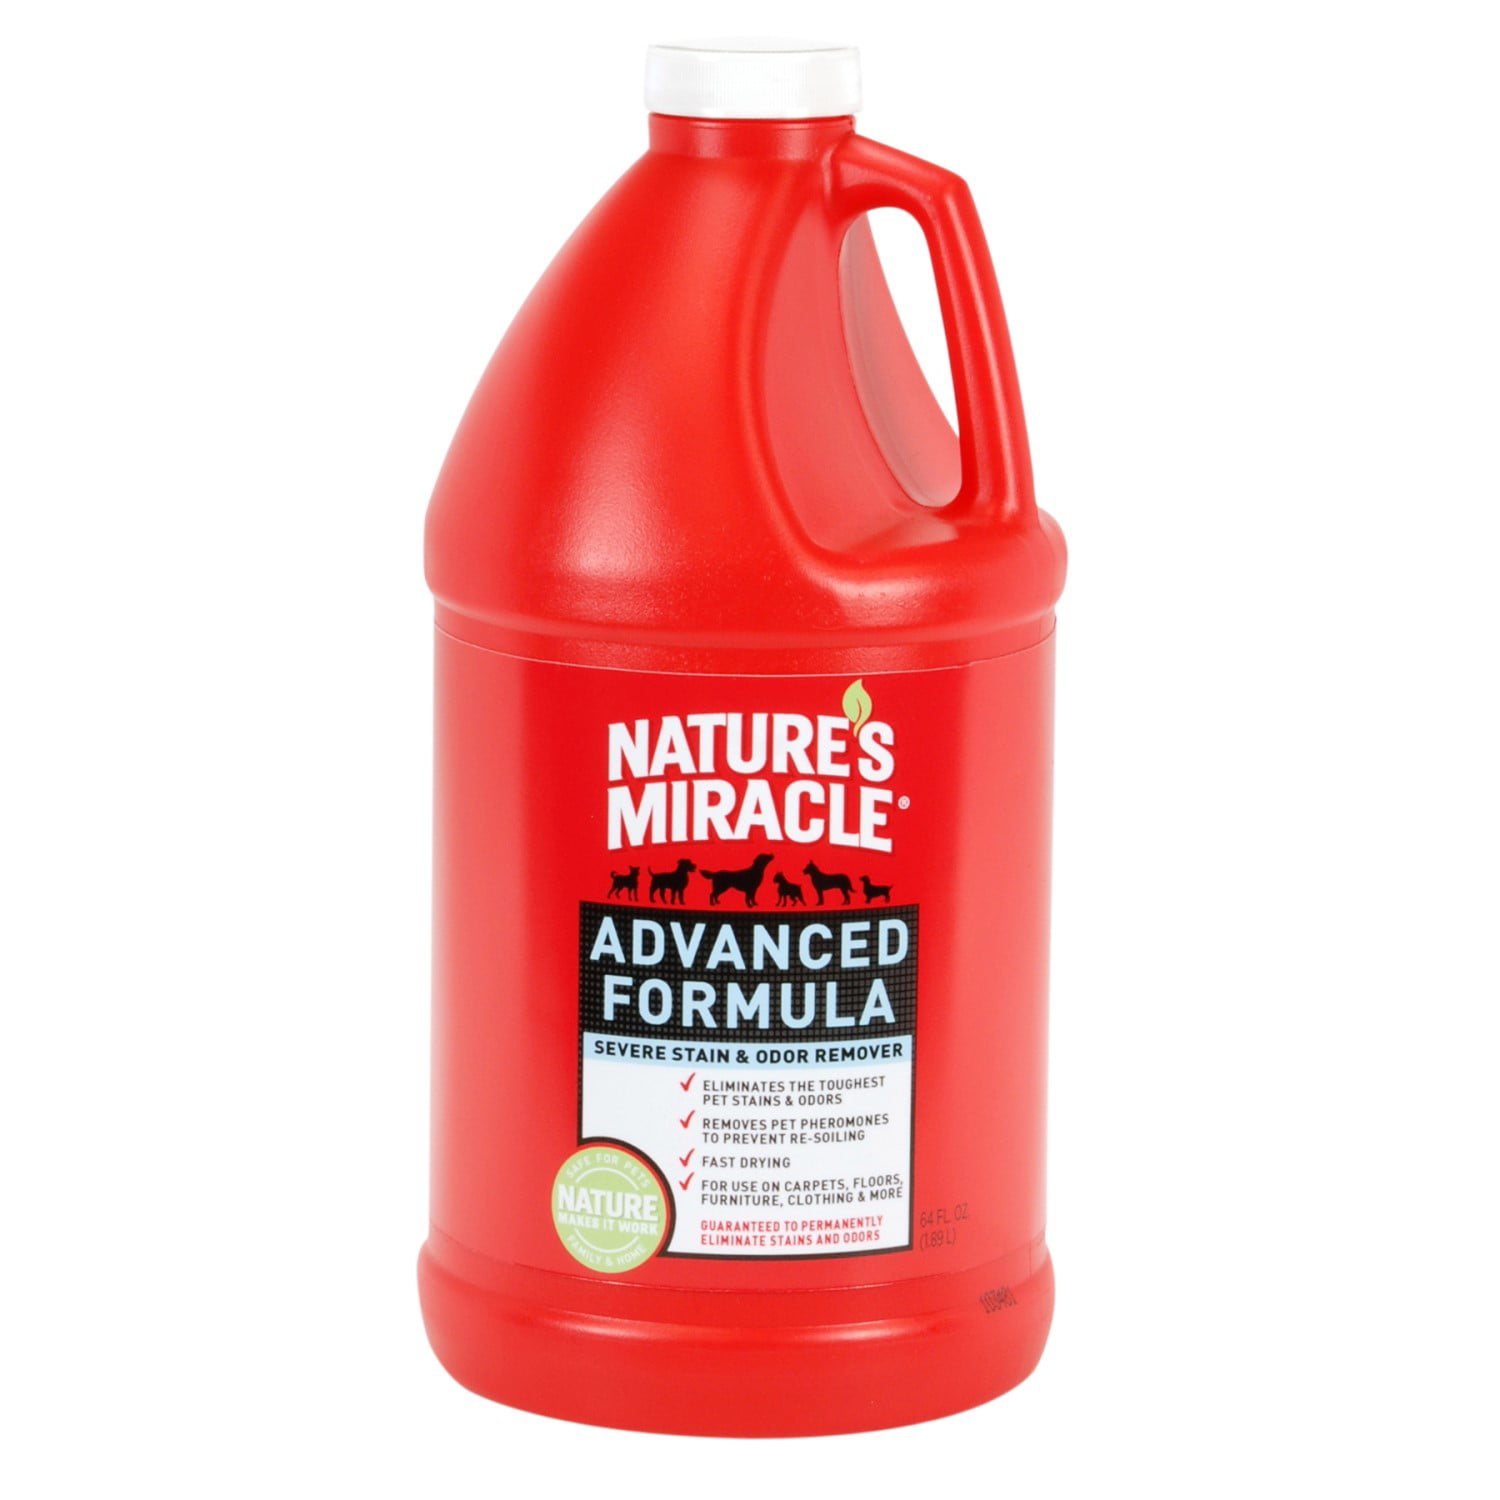 nature's miracle stain and odor remover 1 gallon